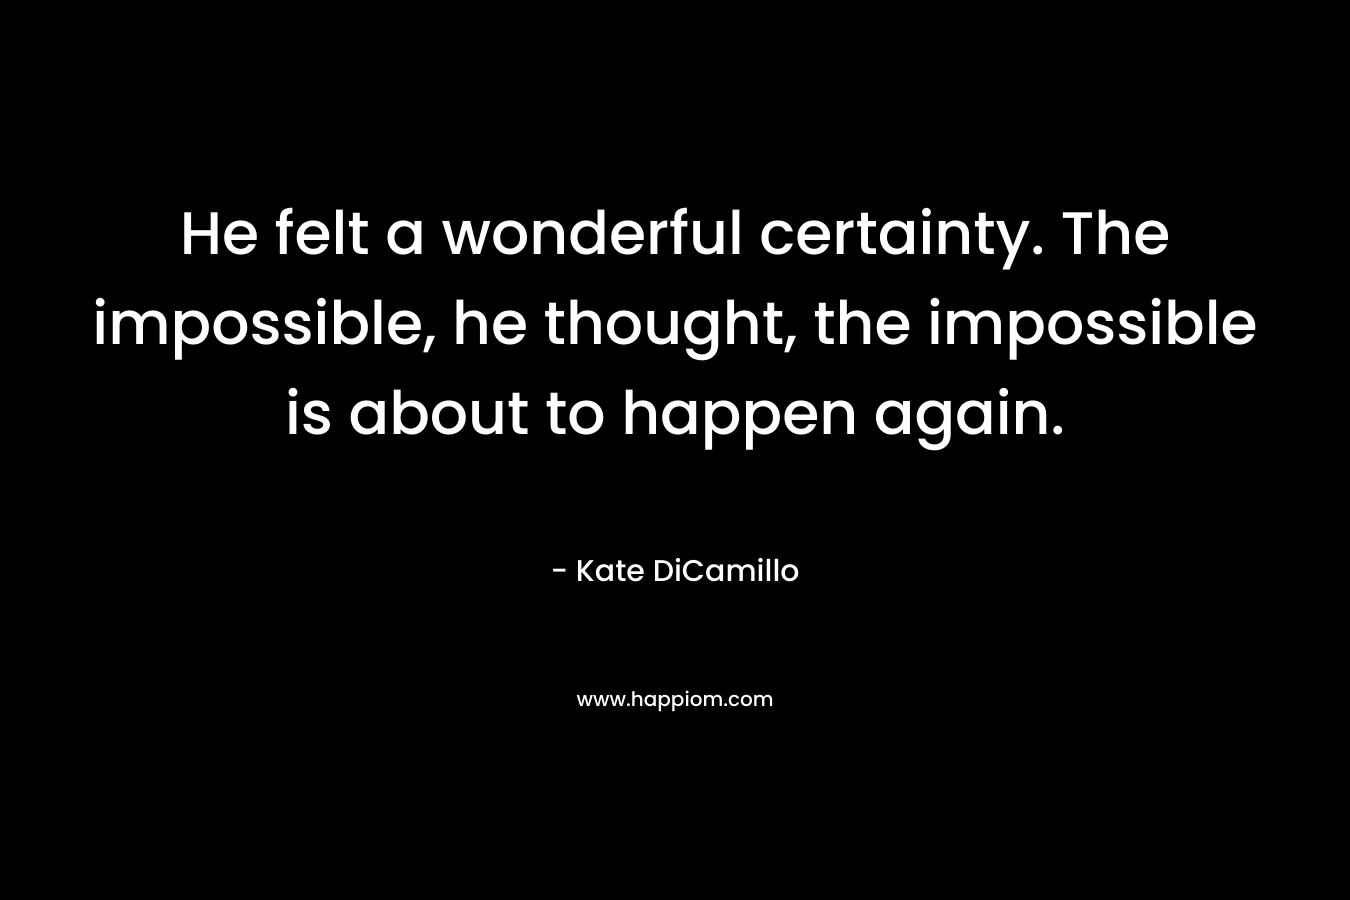 He felt a wonderful certainty. The impossible, he thought, the impossible is about to happen again.